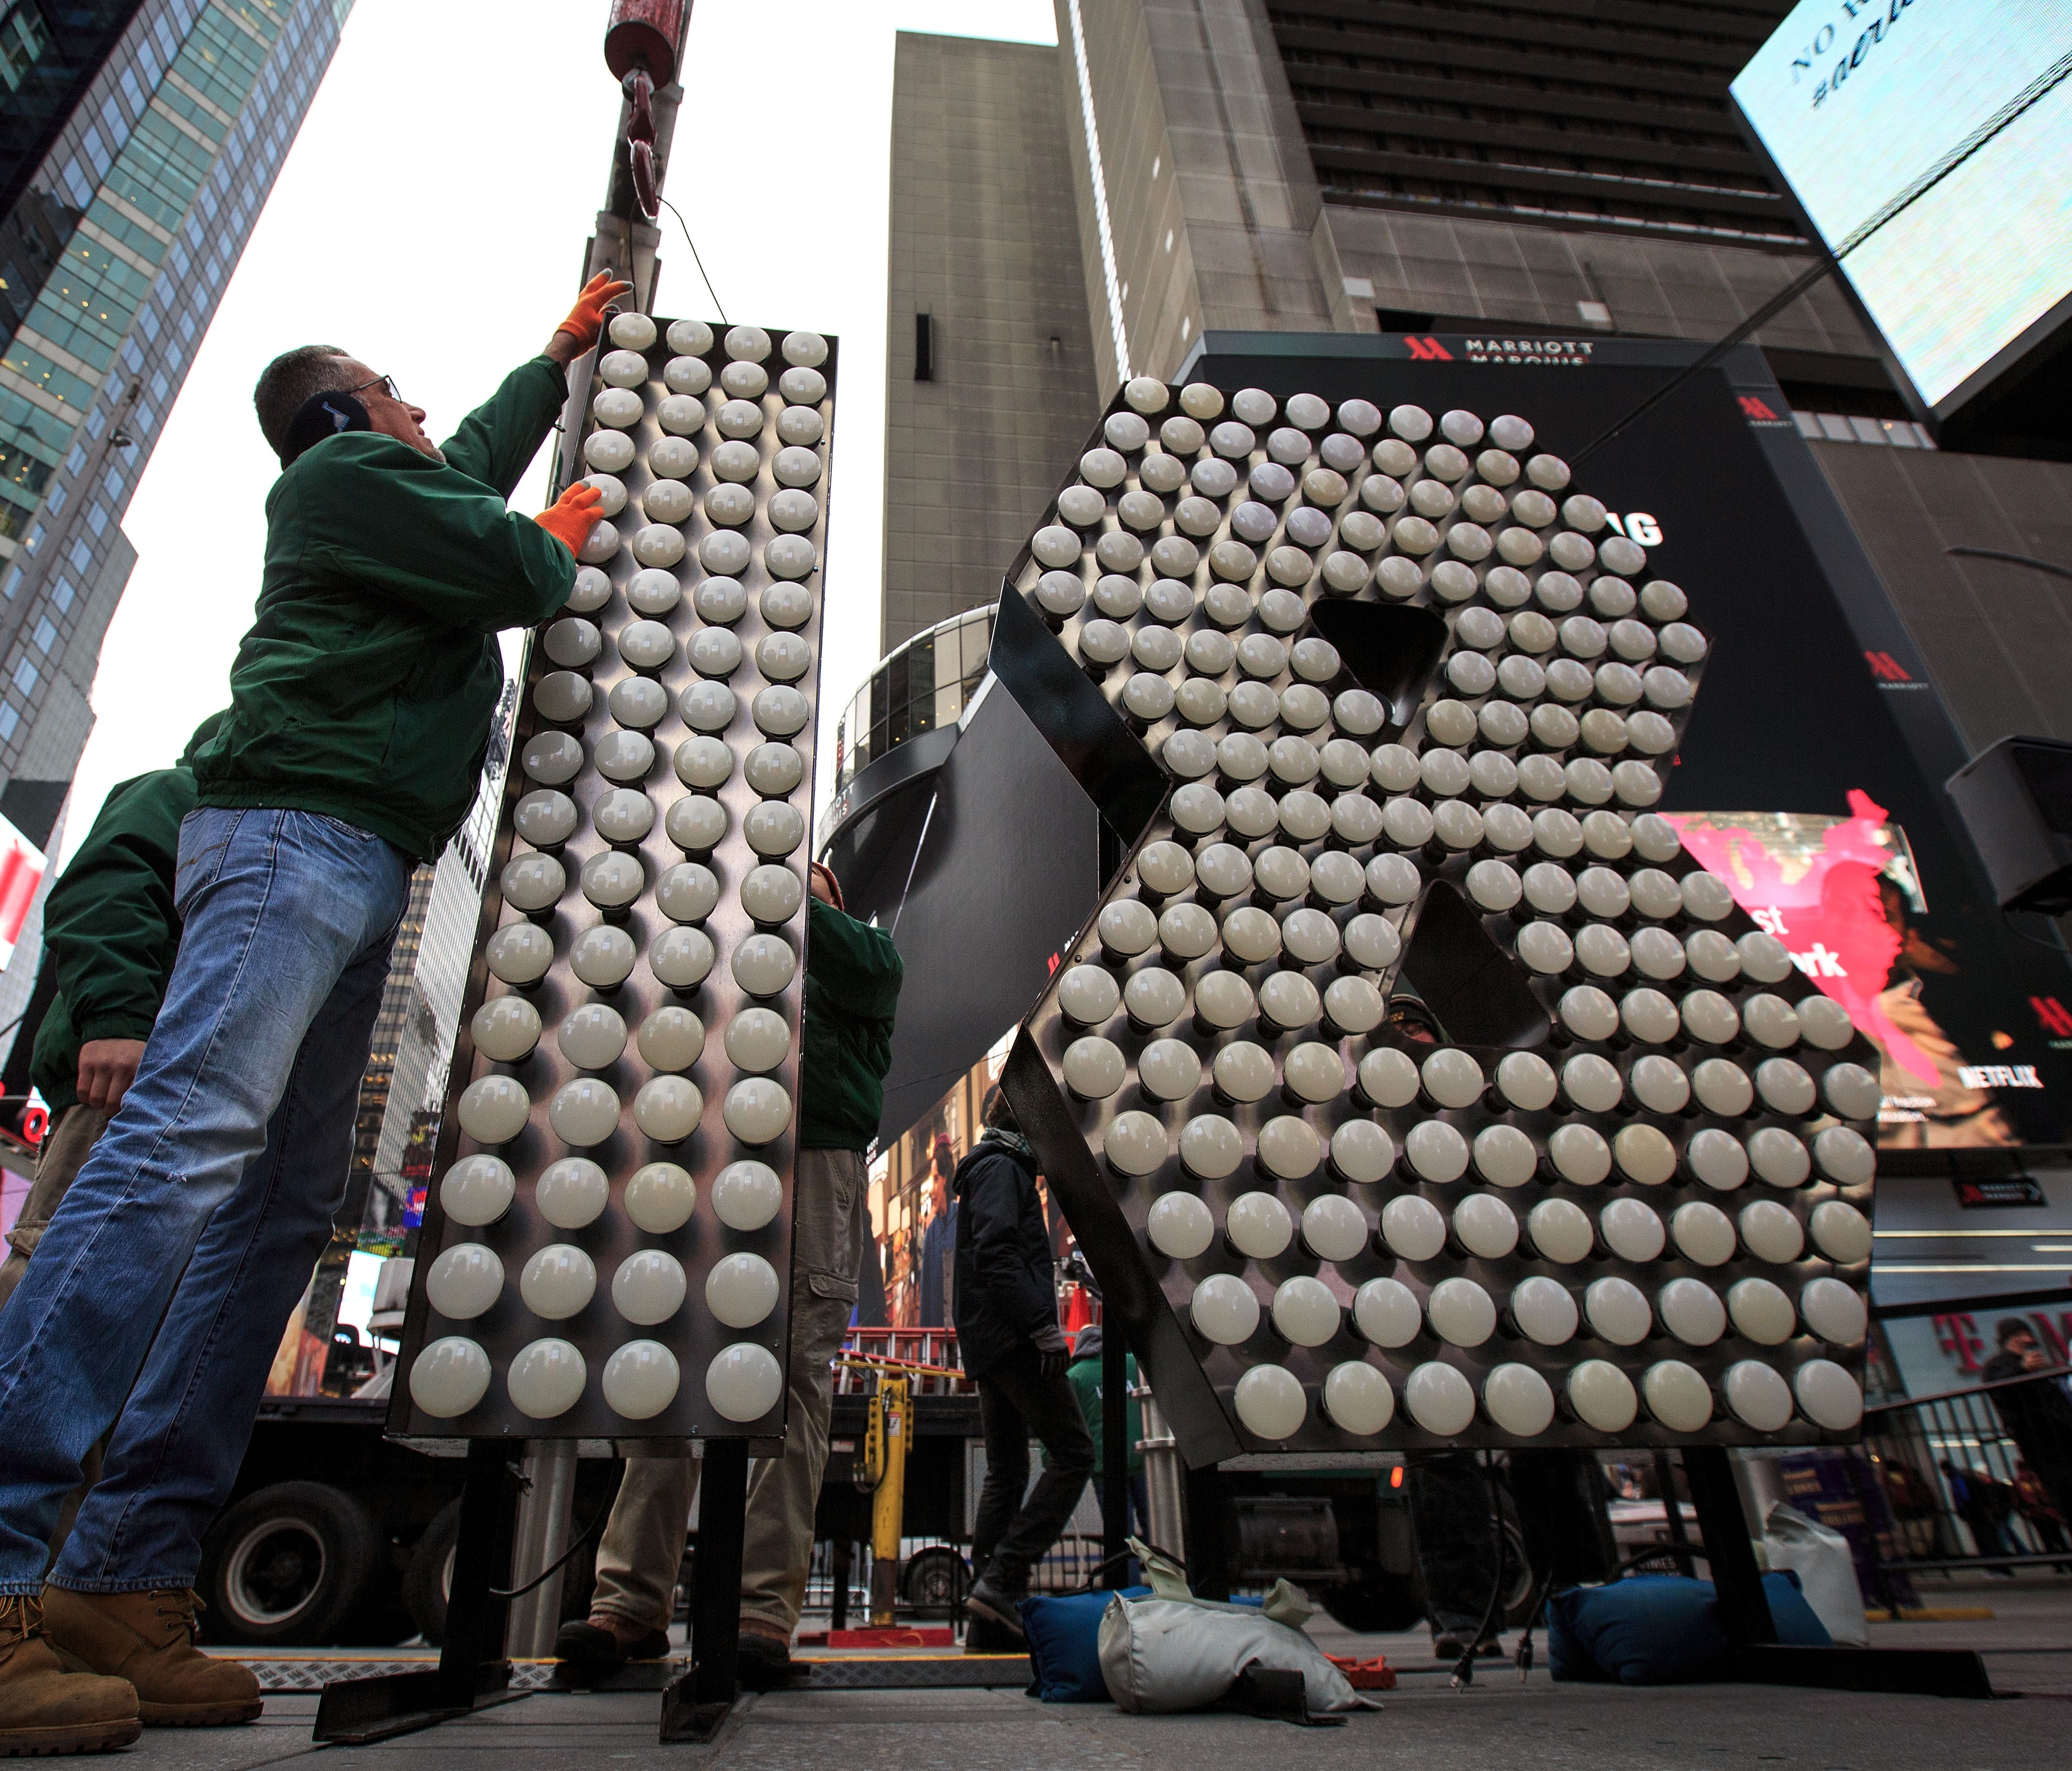 Workers unload the numerals 1 and 8 as they arrive in Times Square ahead of the New Year's Eve celebration.